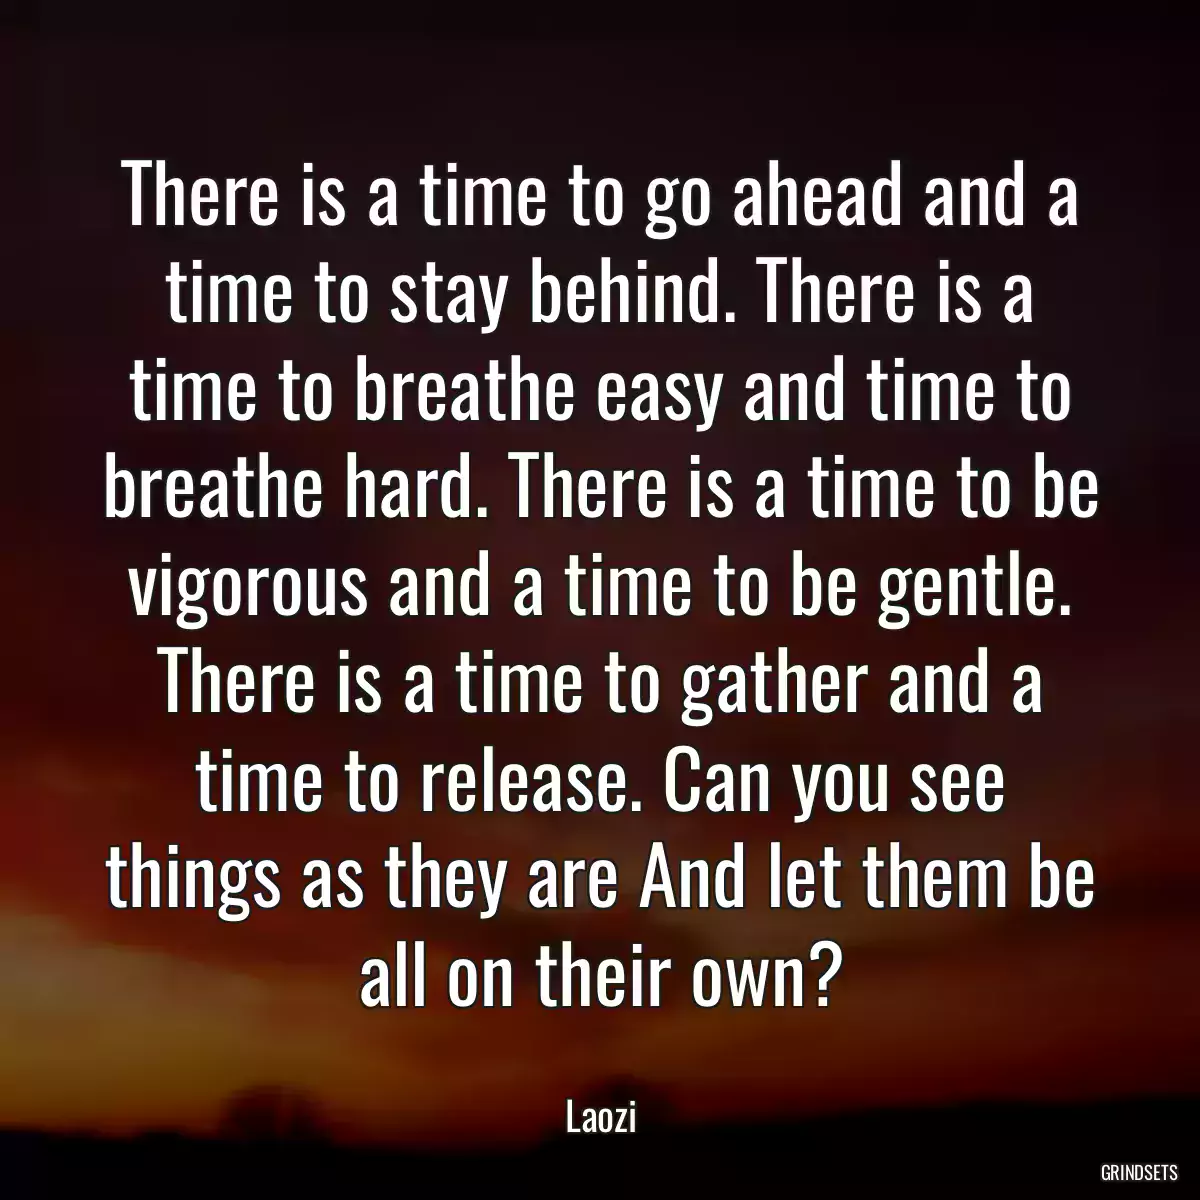 There is a time to go ahead and a time to stay behind. There is a time to breathe easy and time to breathe hard. There is a time to be vigorous and a time to be gentle. There is a time to gather and a time to release. Can you see things as they are And let them be all on their own?